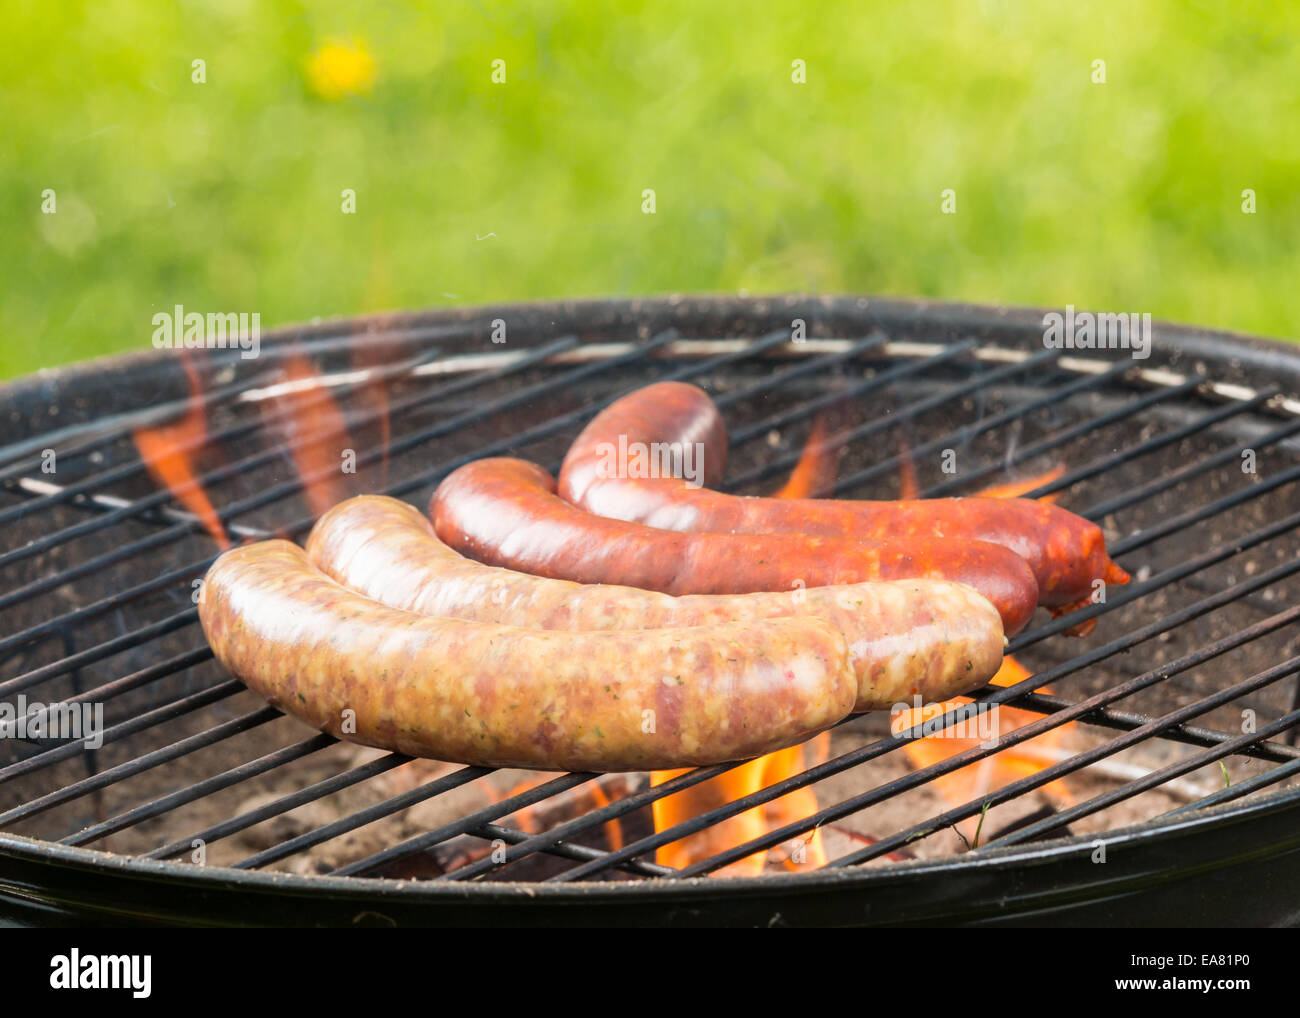 Delicious grilled sausages burning in fire Stock Photo